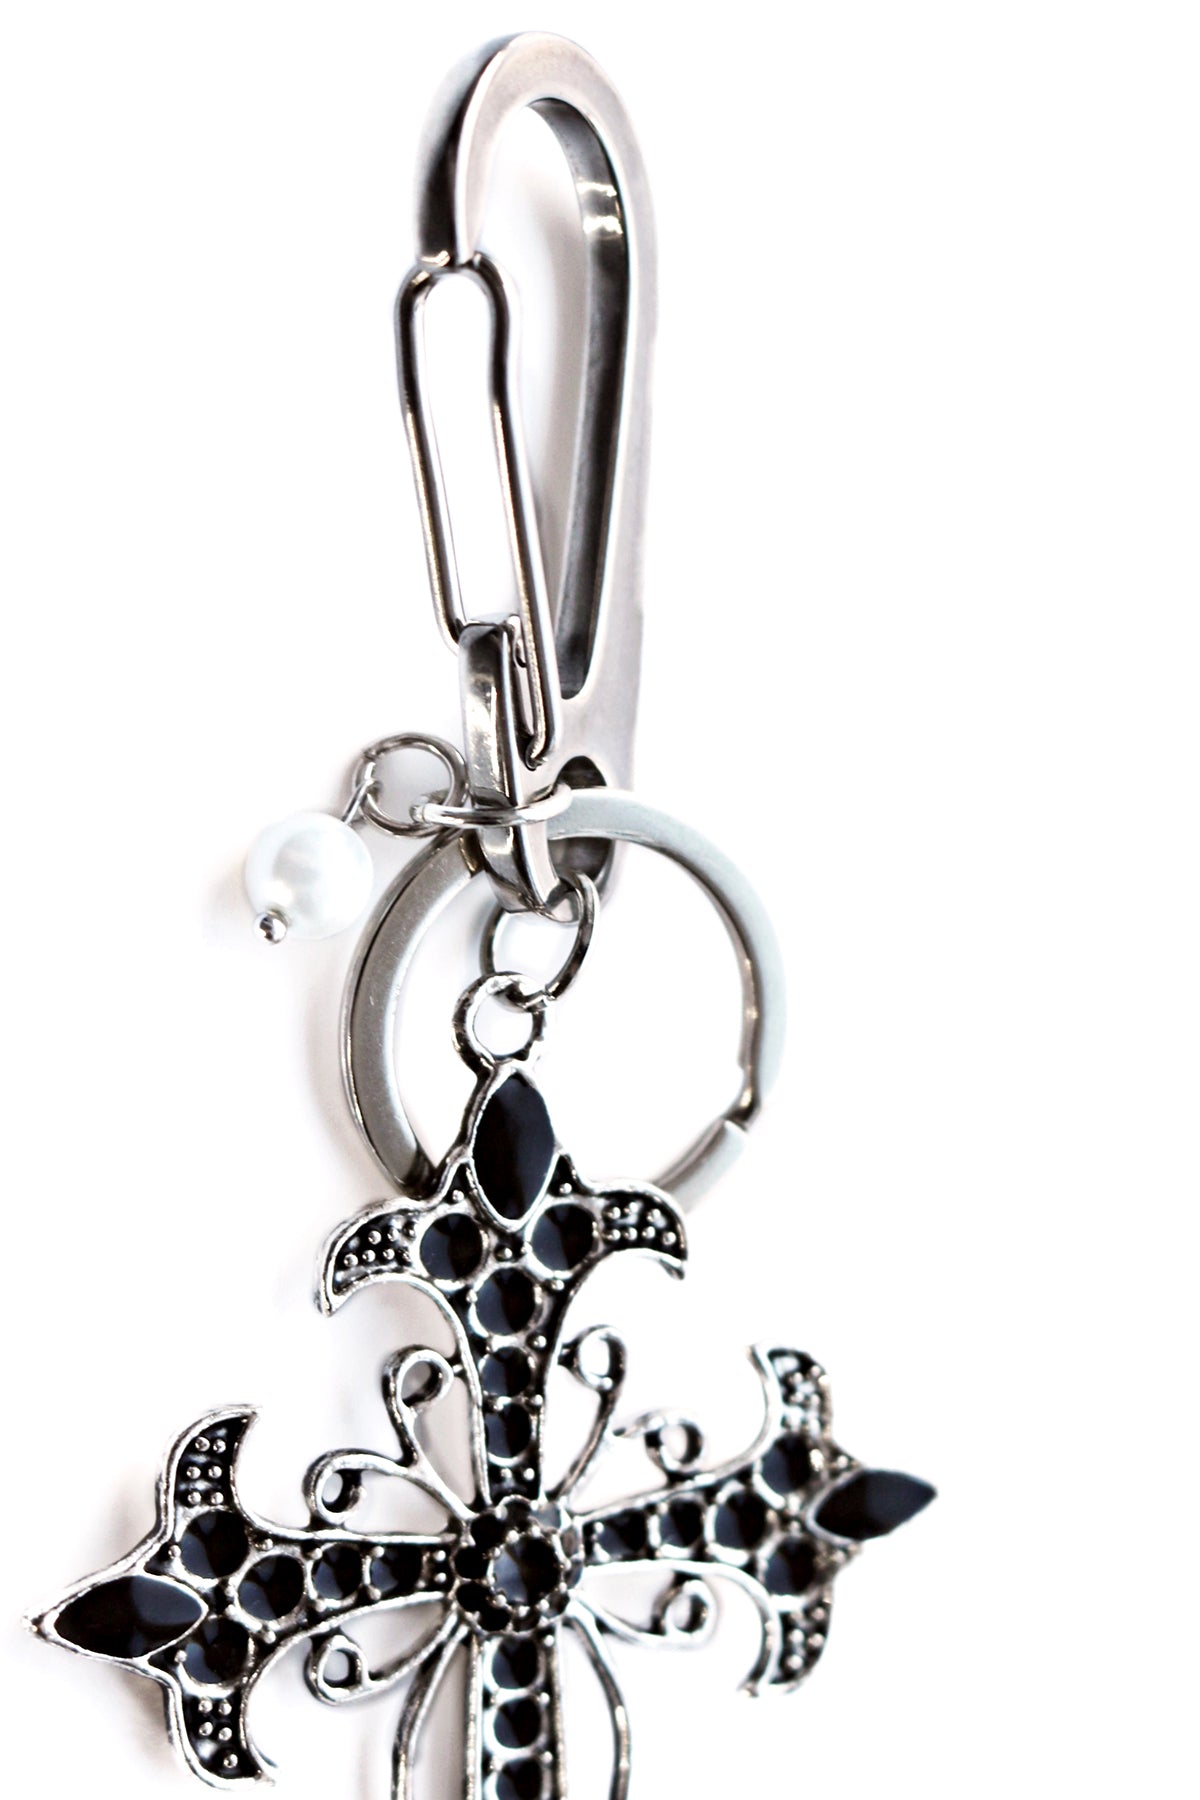 LARGE BLACK:SILVER CROSS PENDENT KEYCHAIN